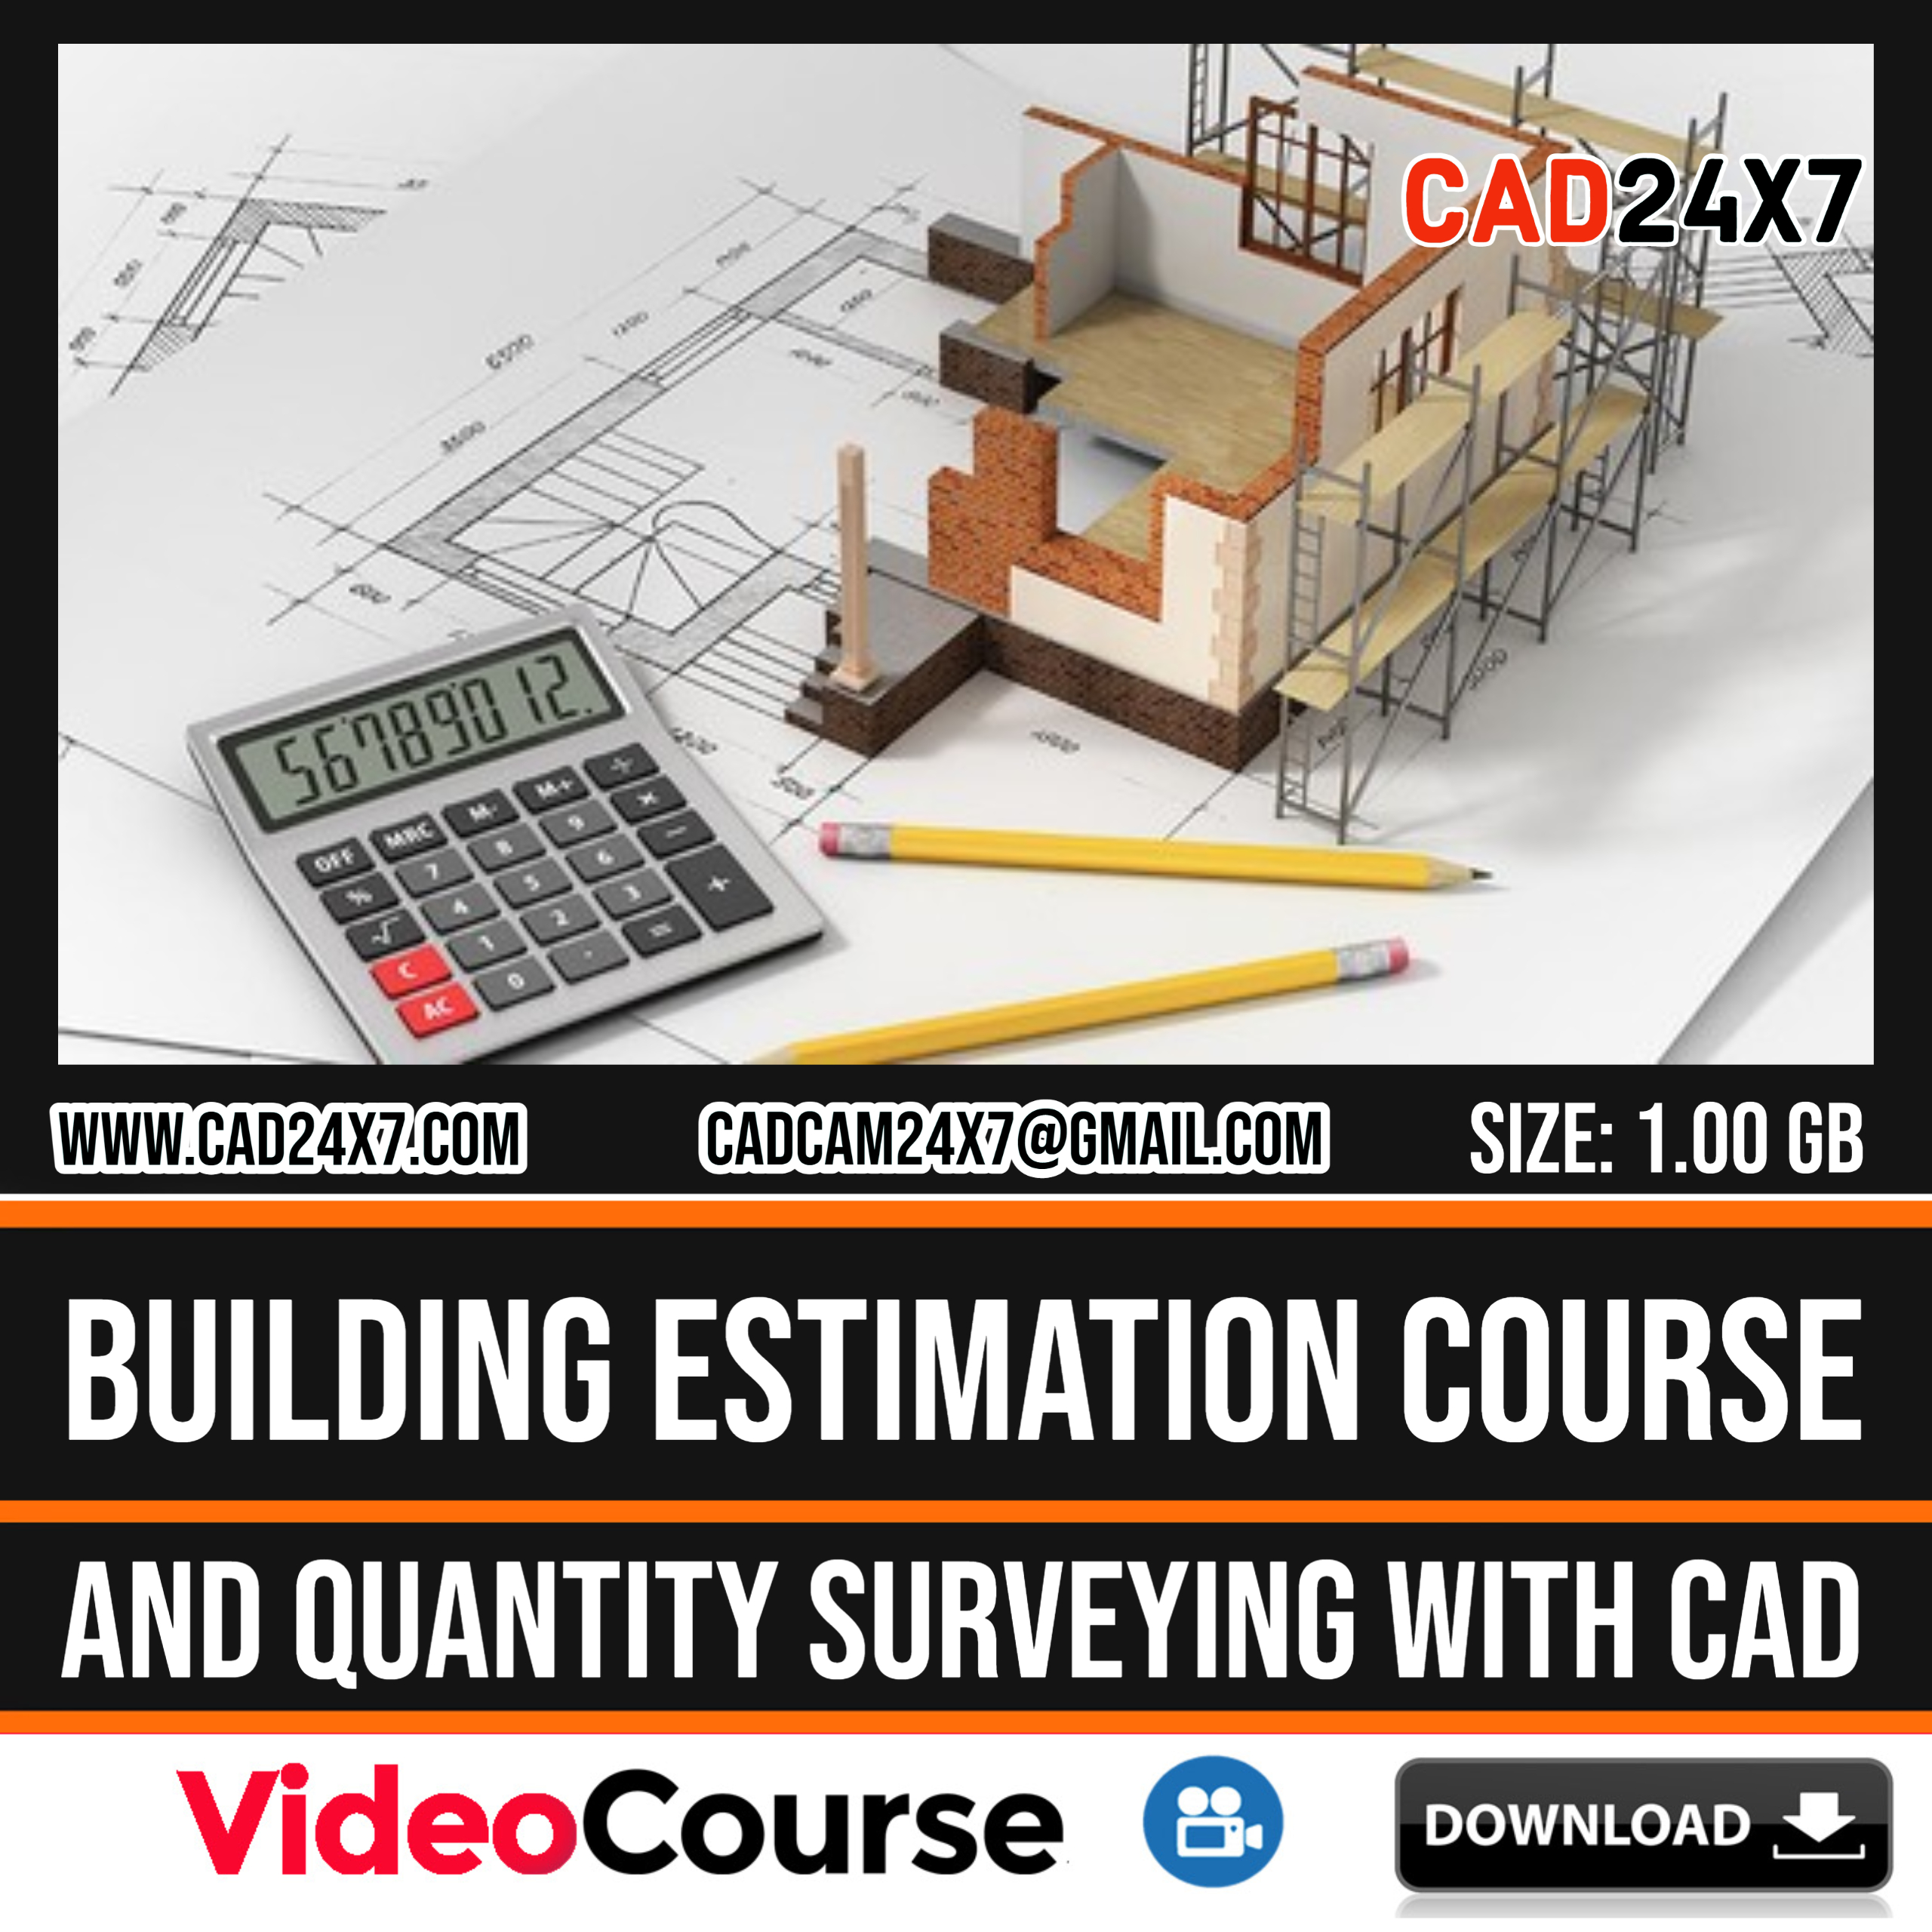 Building Estimation Course and Quantity Surveying With Cad